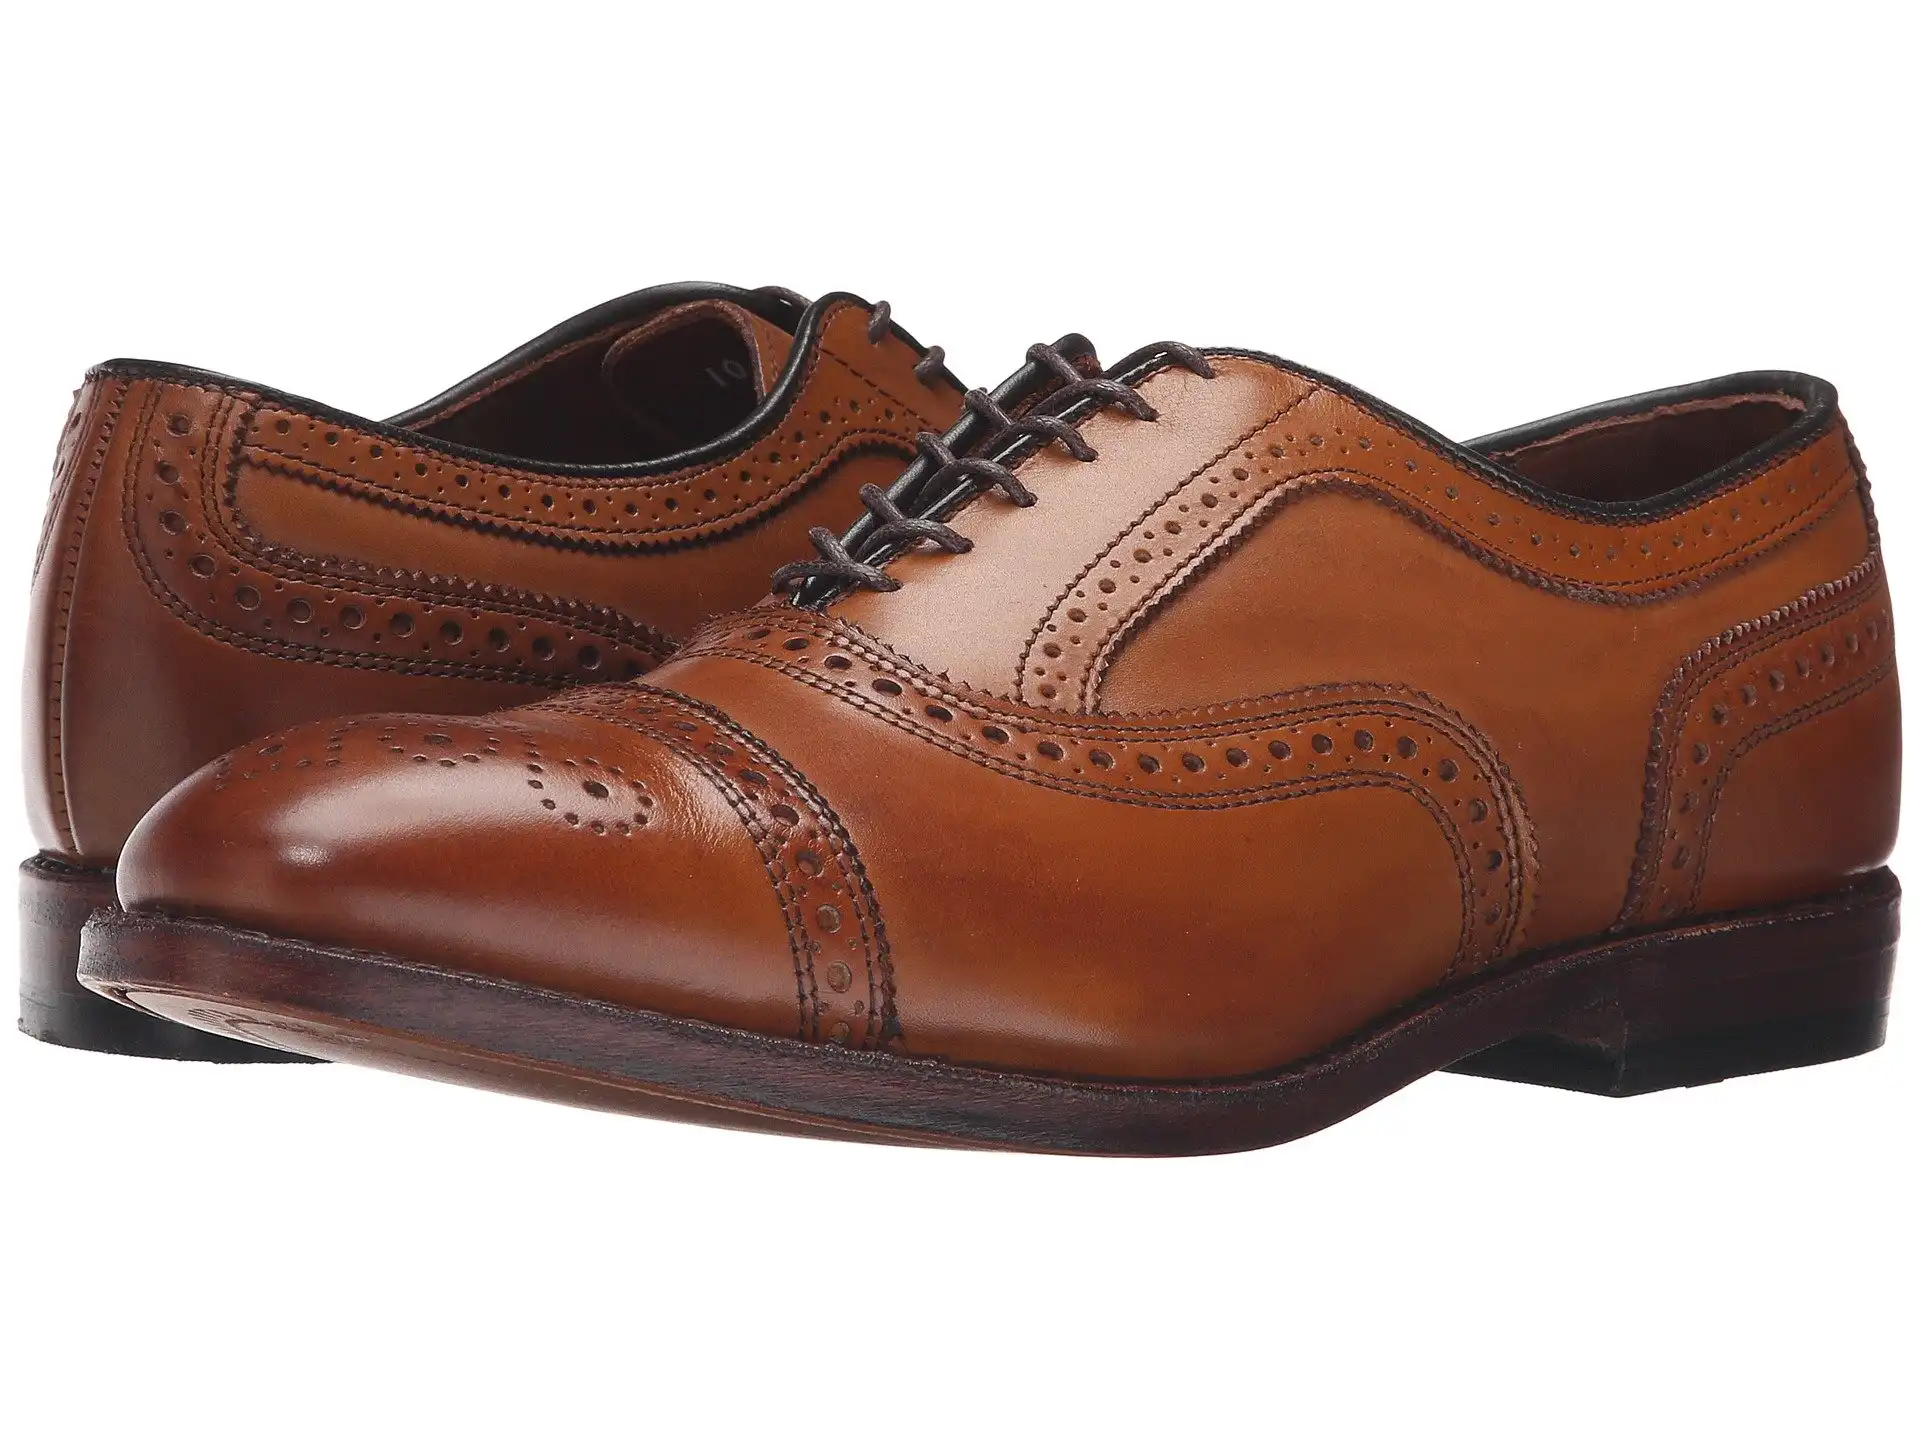 allen edmonds strand in cognac - ultimate guide to buying, wearing, and caring for brown dress shoes